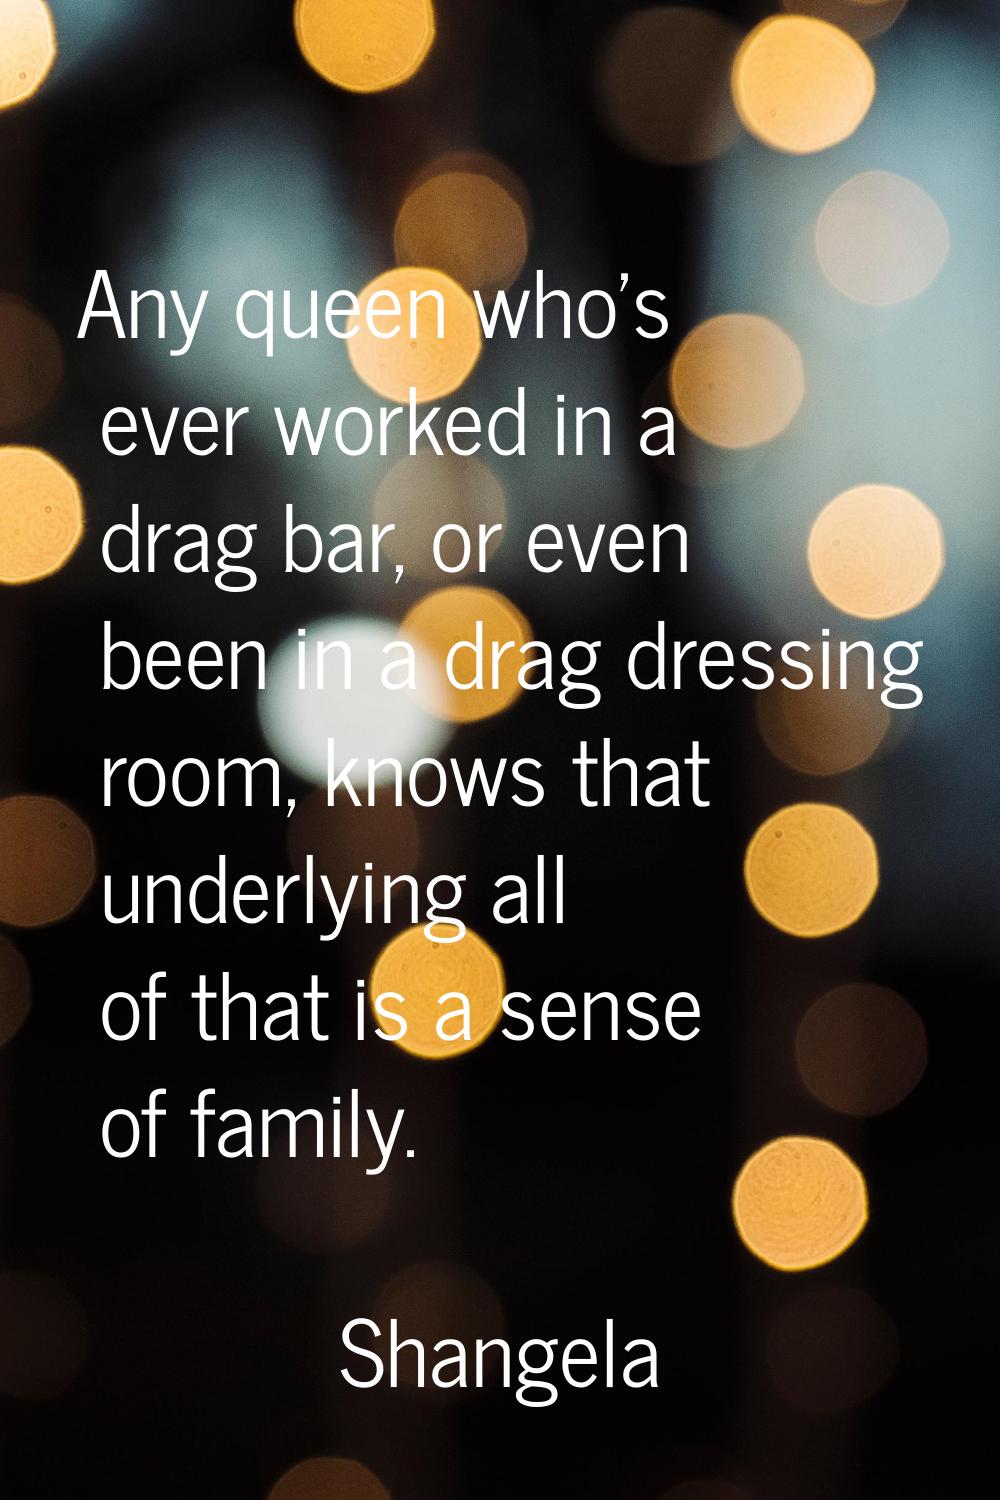 Any queen who's ever worked in a drag bar, or even been in a drag dressing room, knows that underly